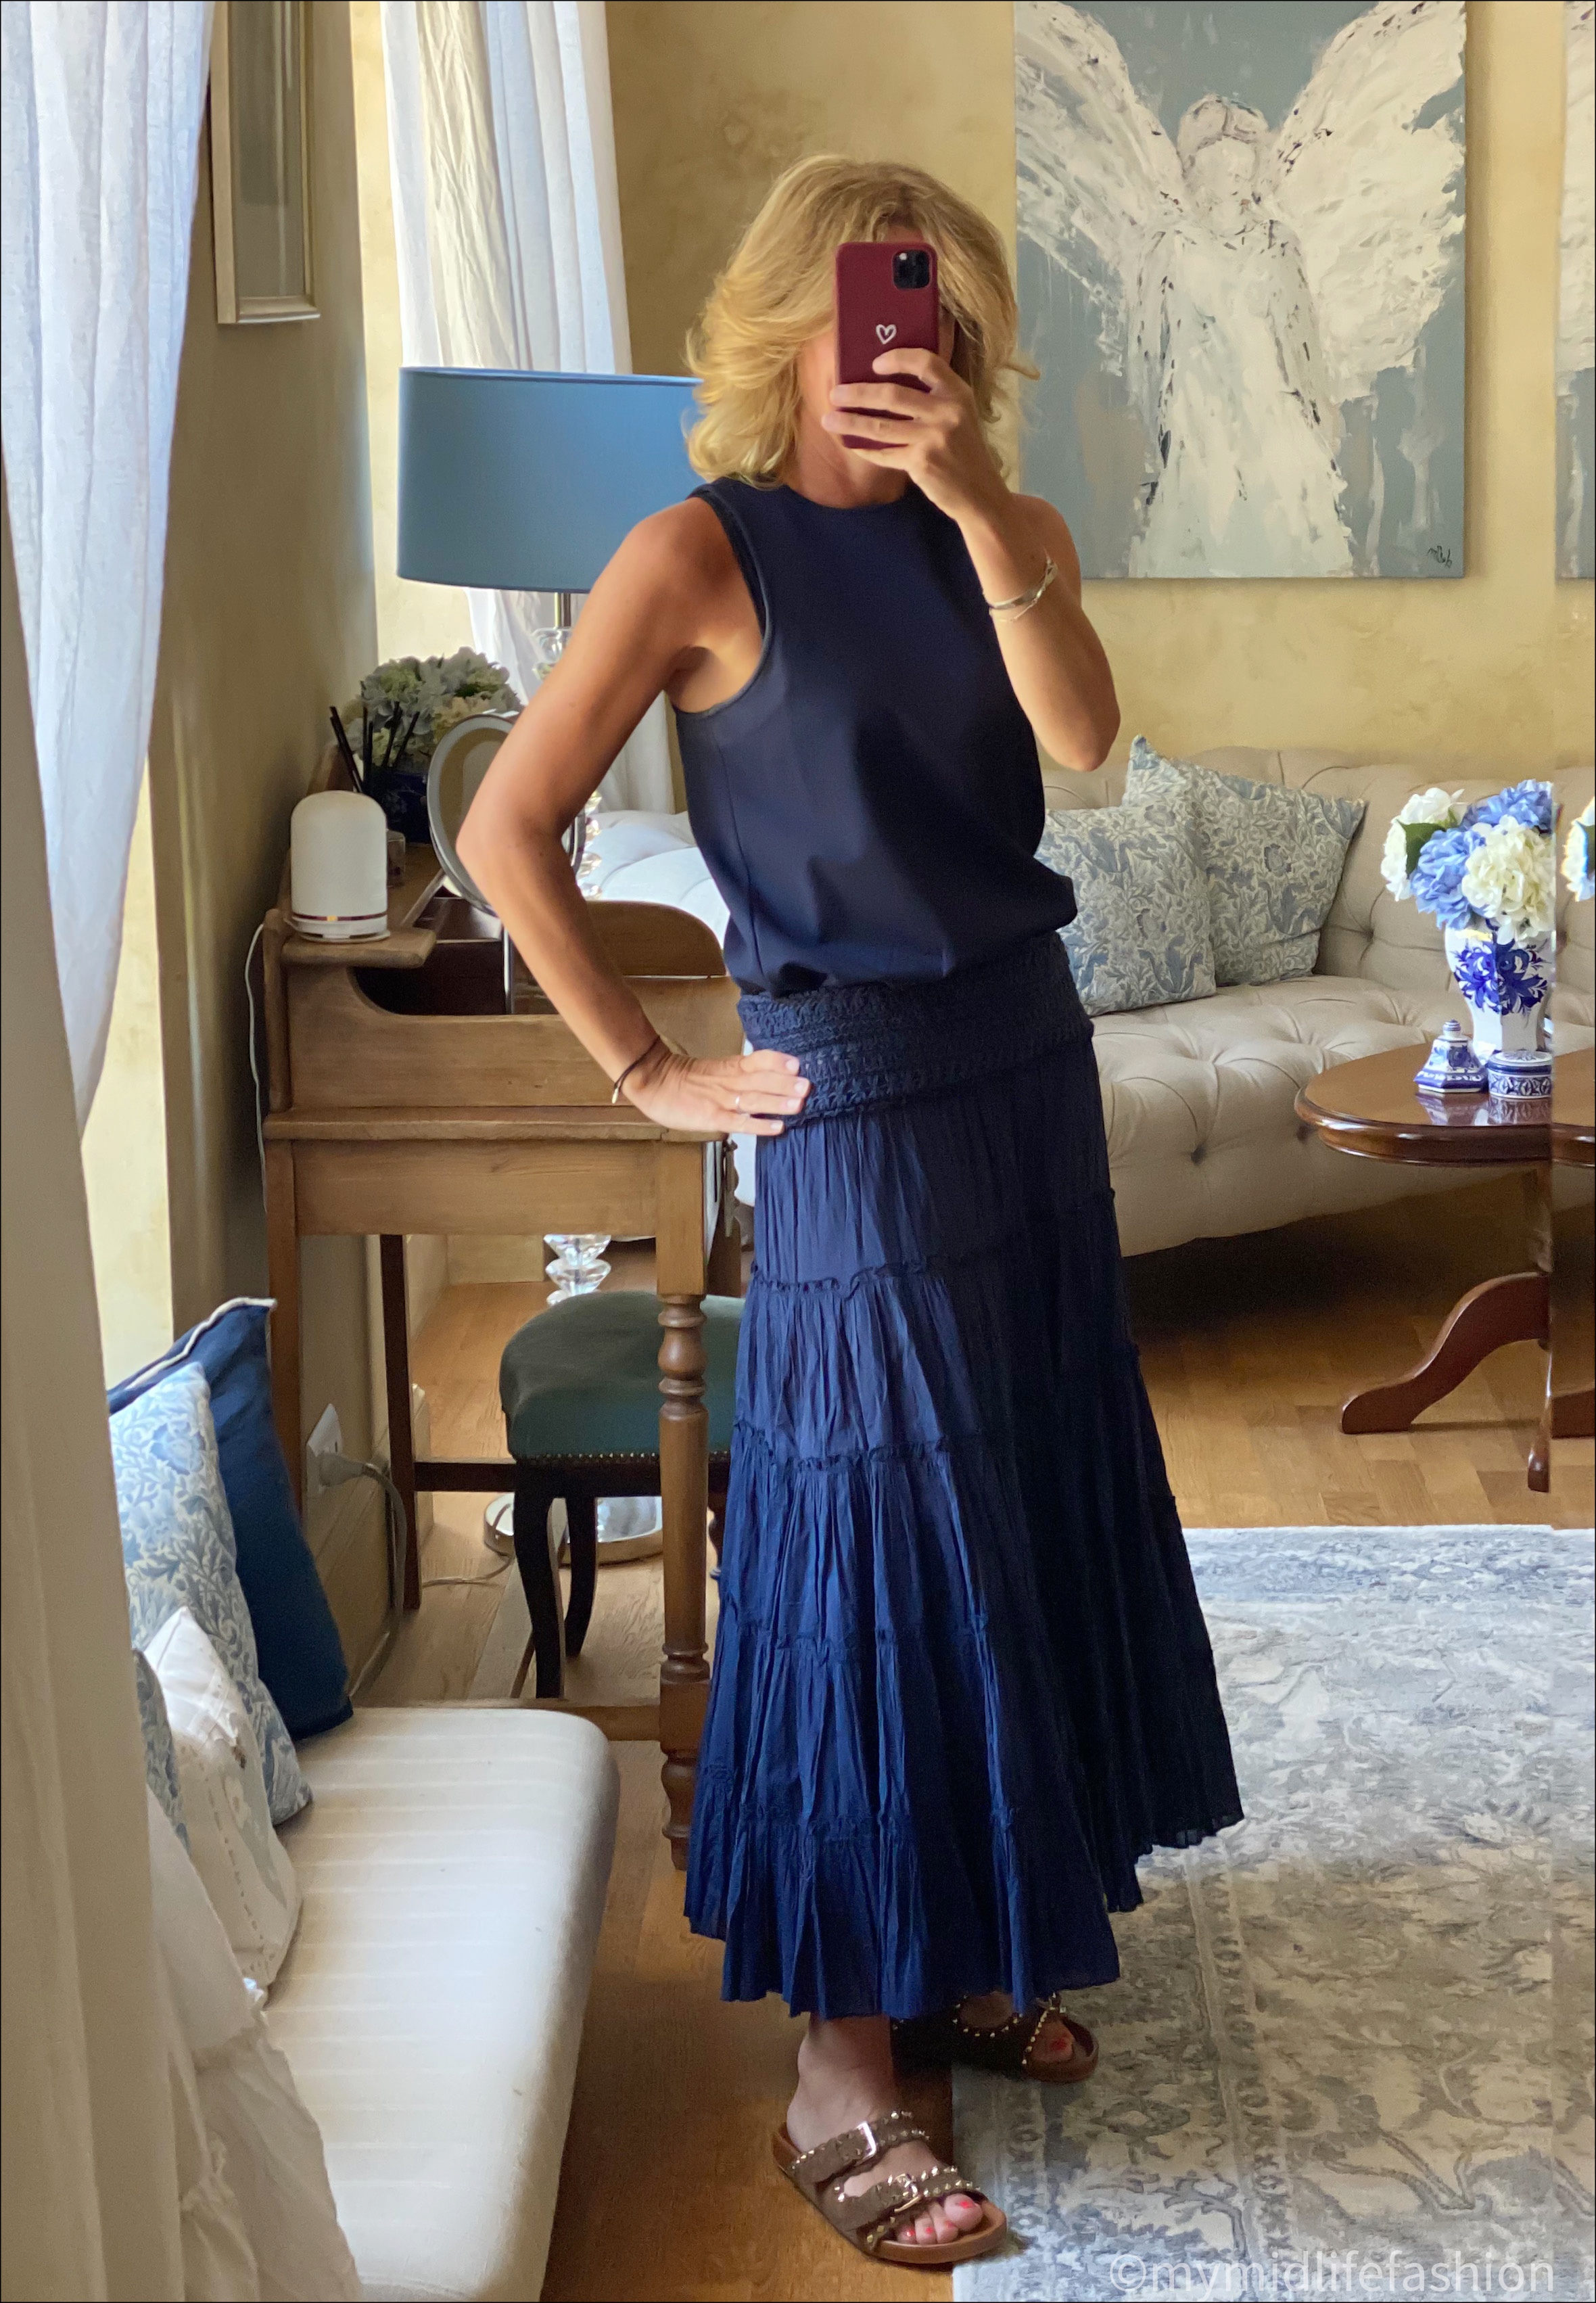 my midlife fashion, tibi shell top, cotton tiered maxi skirt, studded suede sliders